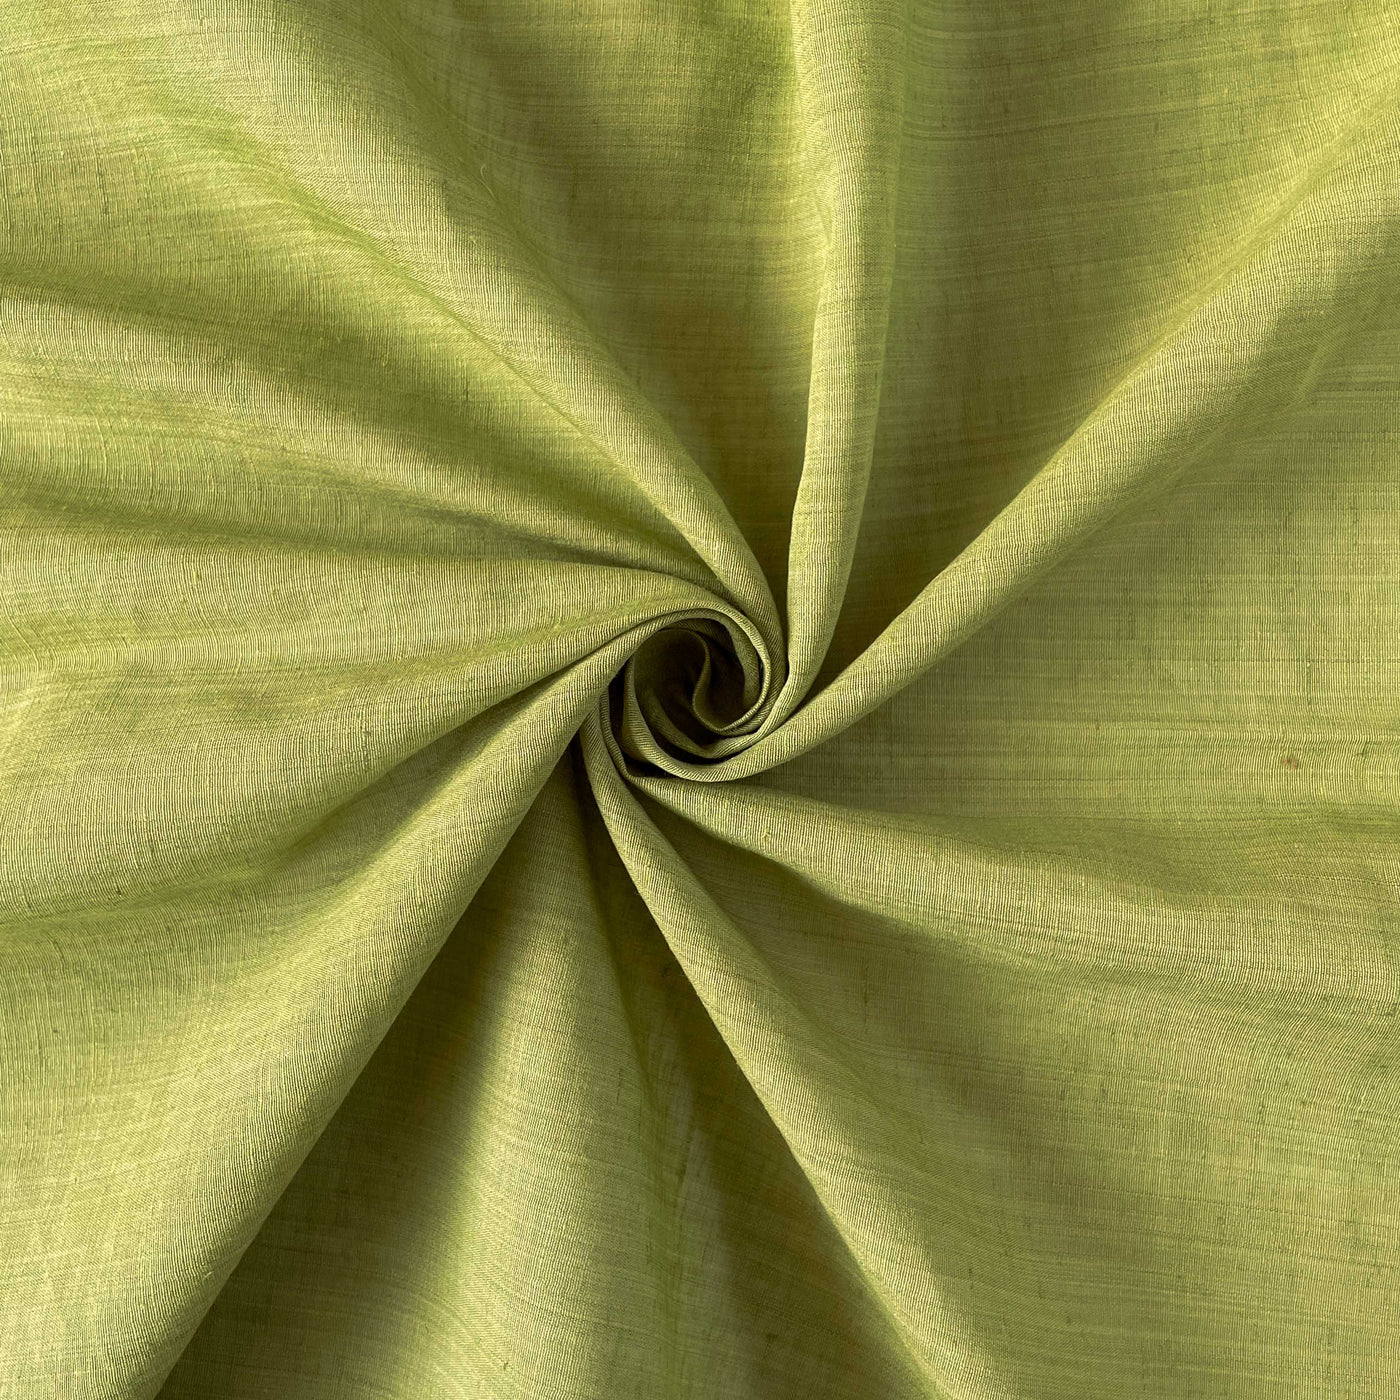 Blended Silk Linen Fabric Fabric Dusty Olive Green Blended Silk Linen Fabric (Width 58 Inches)